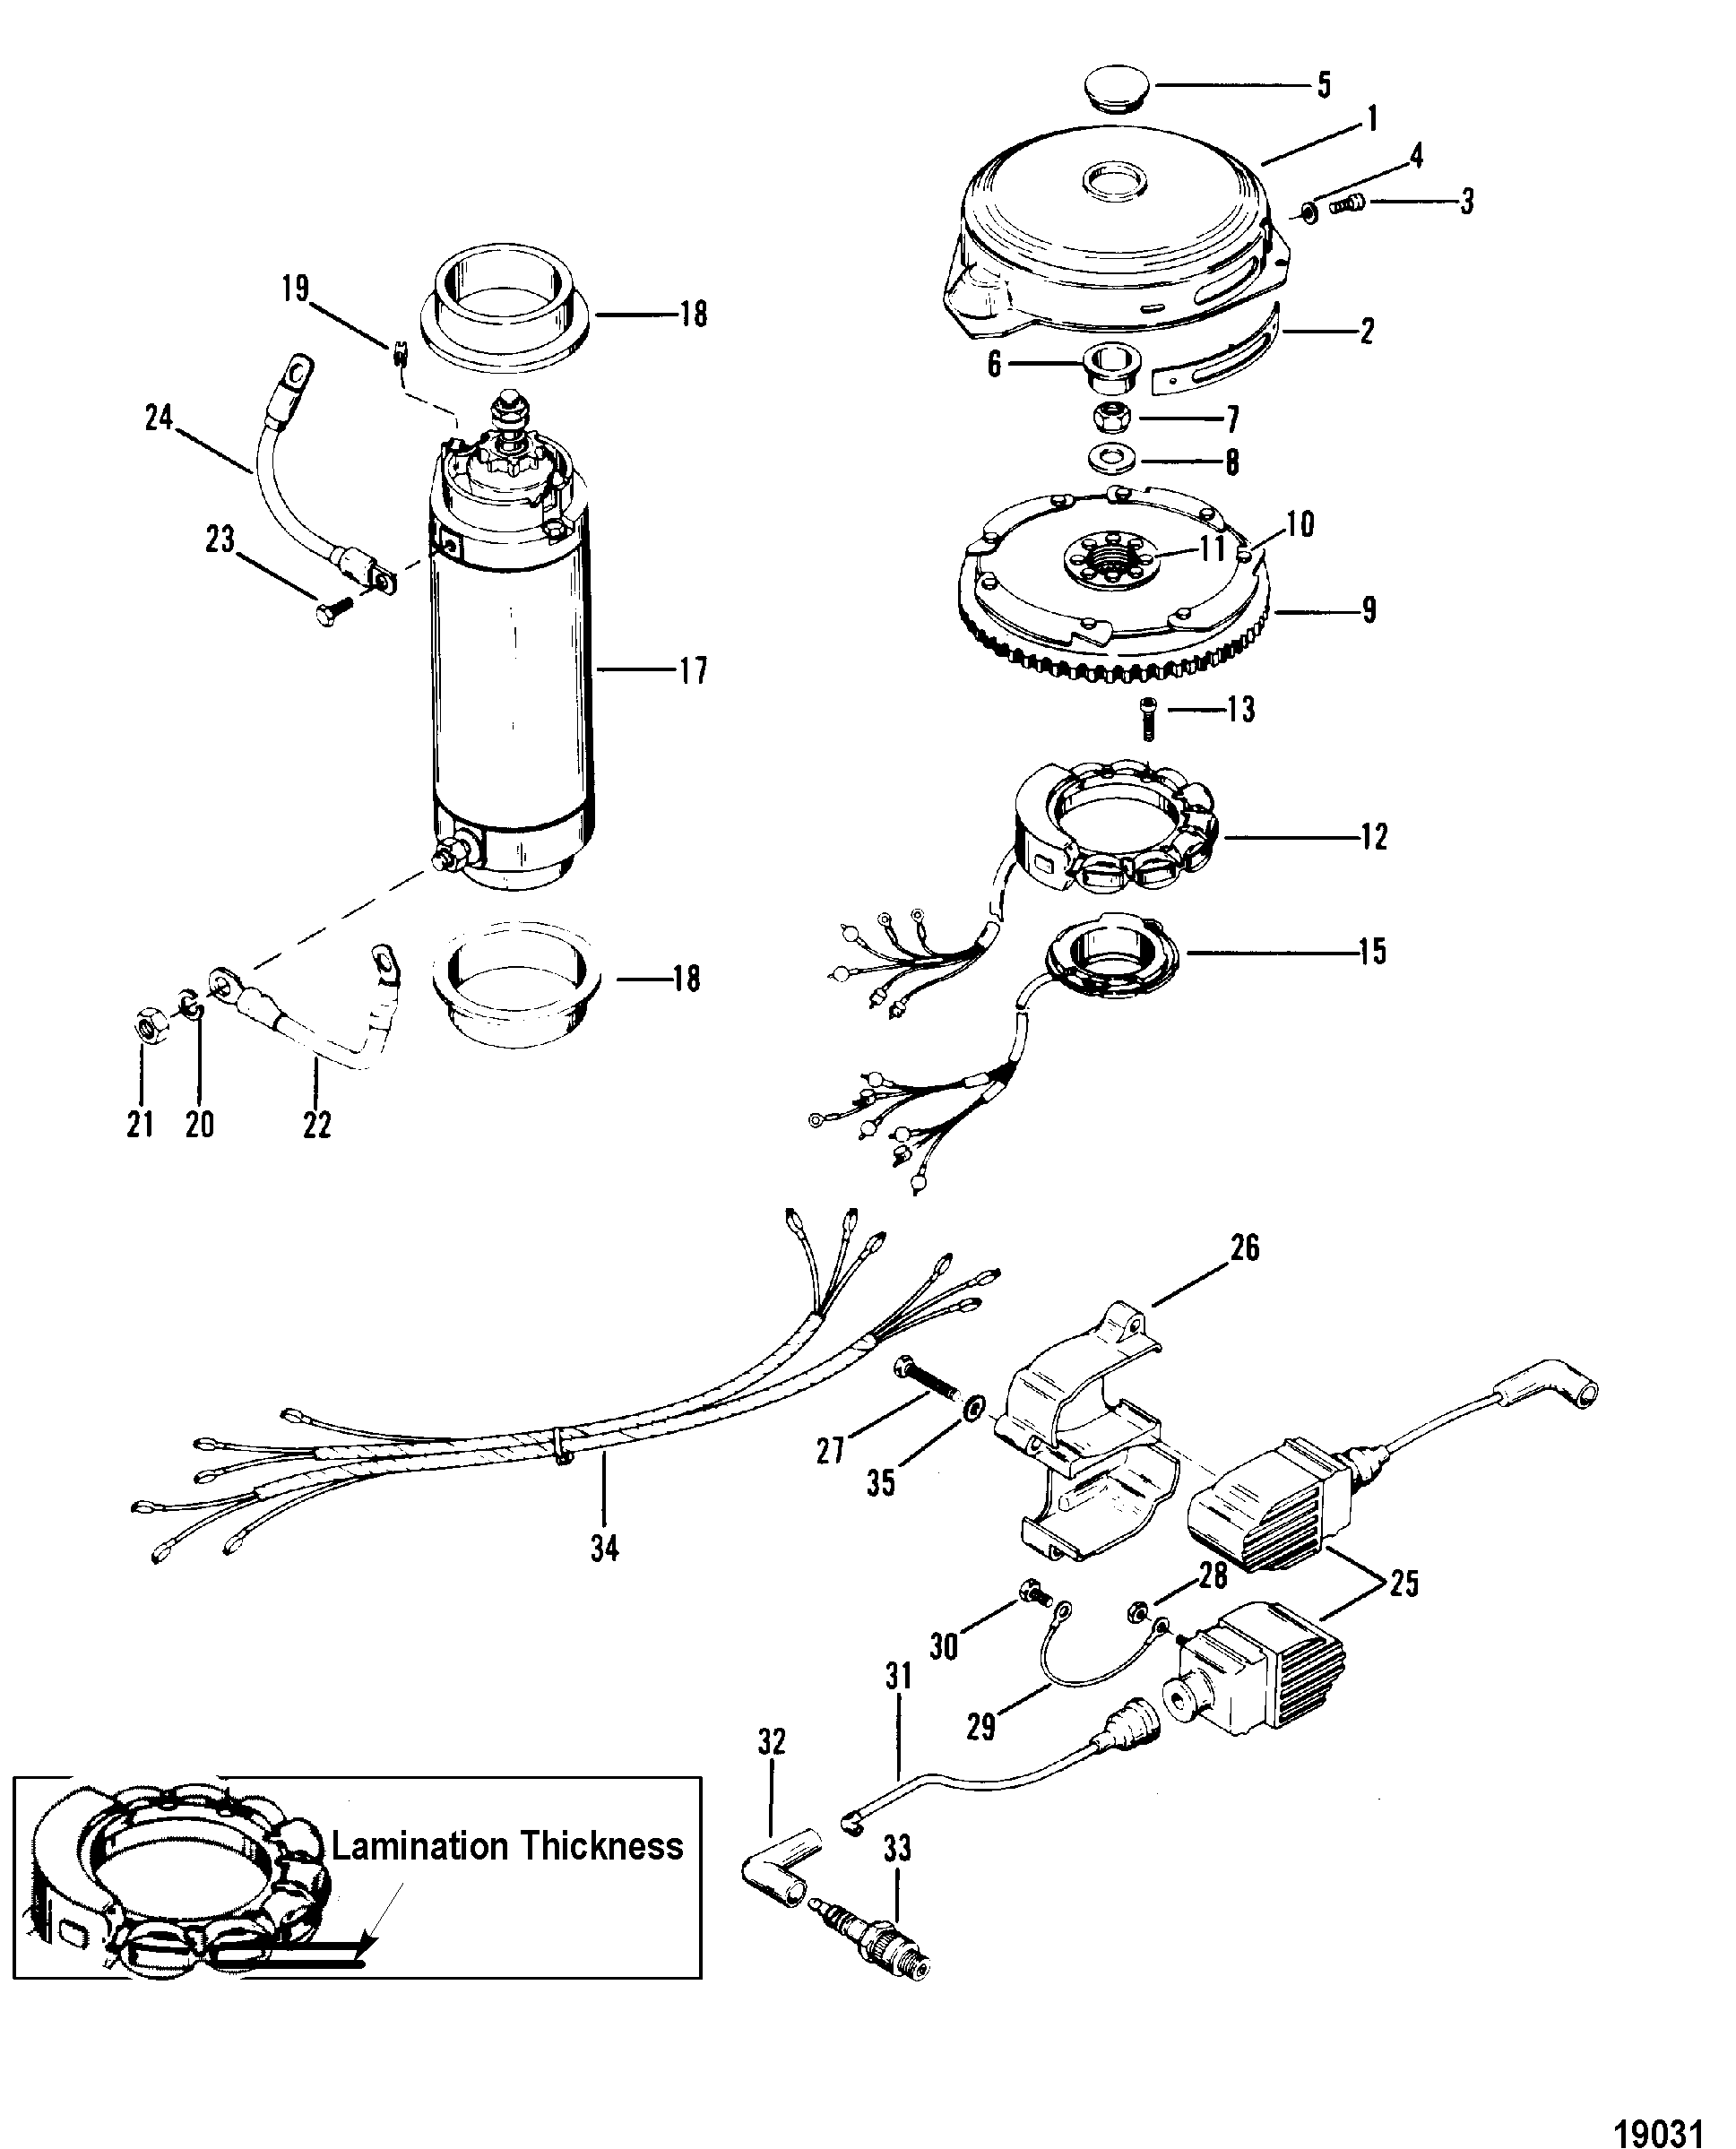 Flywheel, Starter Motor and Ignition Coils